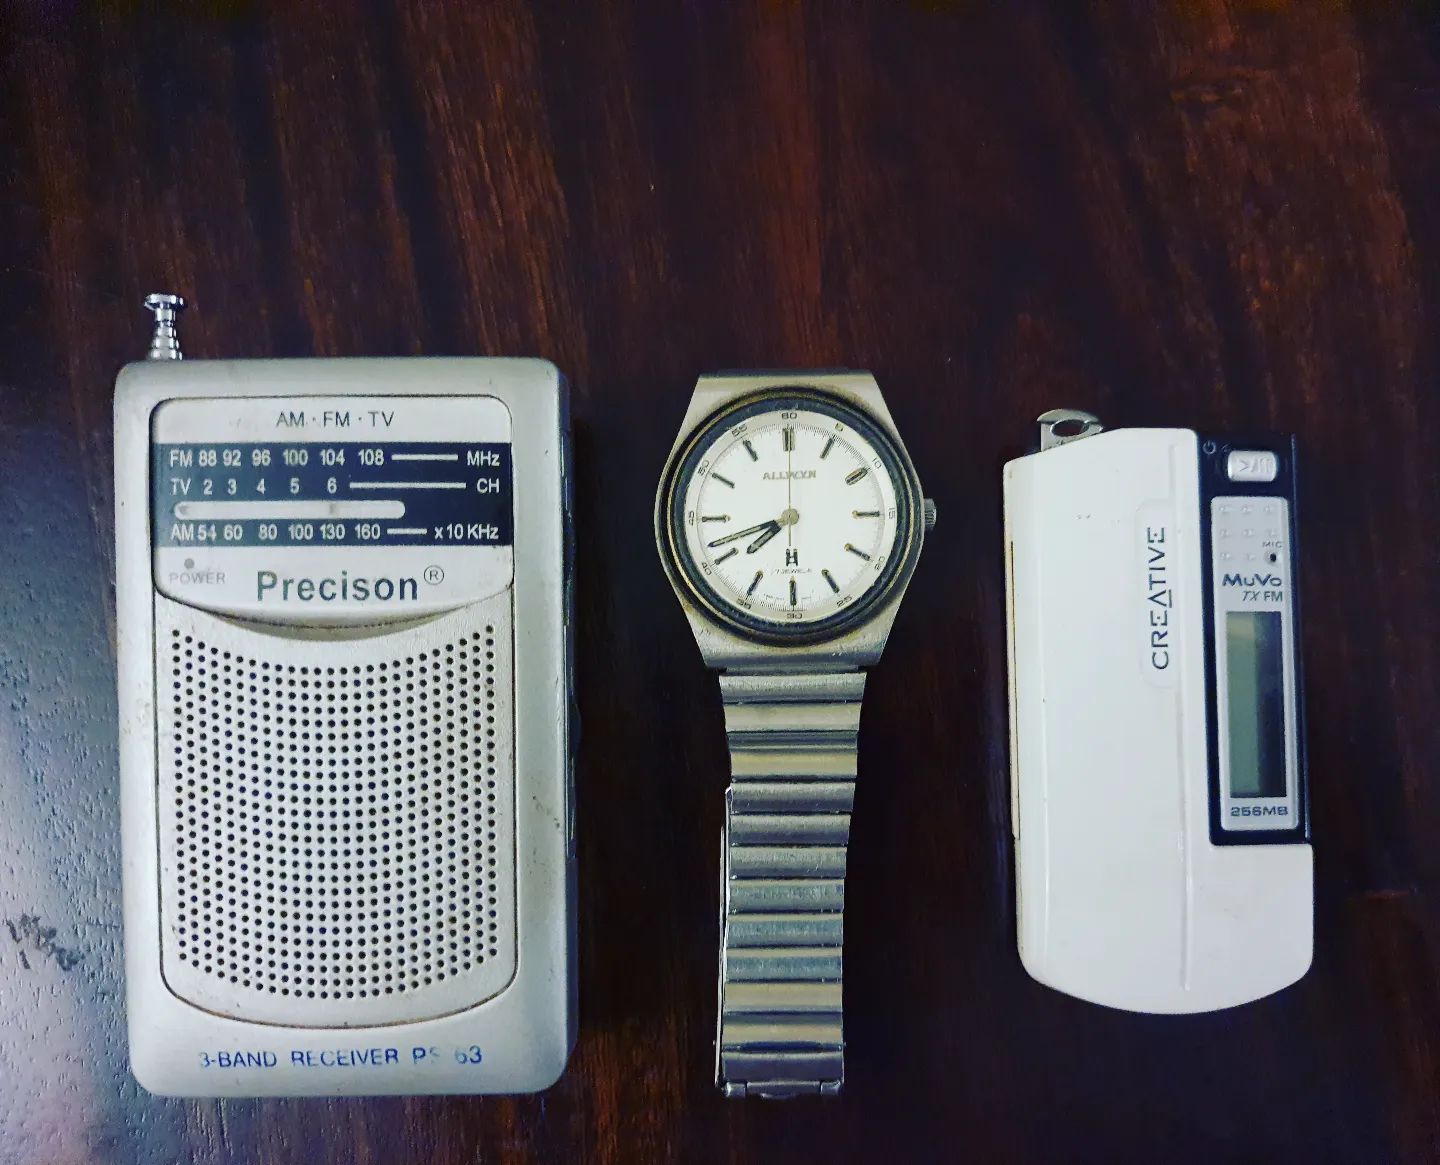 My first radio, watch and mp3 player.I got this radio ( Rs. 130) to listen to Radio City in 2001. Allwyn was my father's. He gave me when he  got a new watch.I got this creative mp3 player probably I'm 2005. I remember getting it for my friends too.